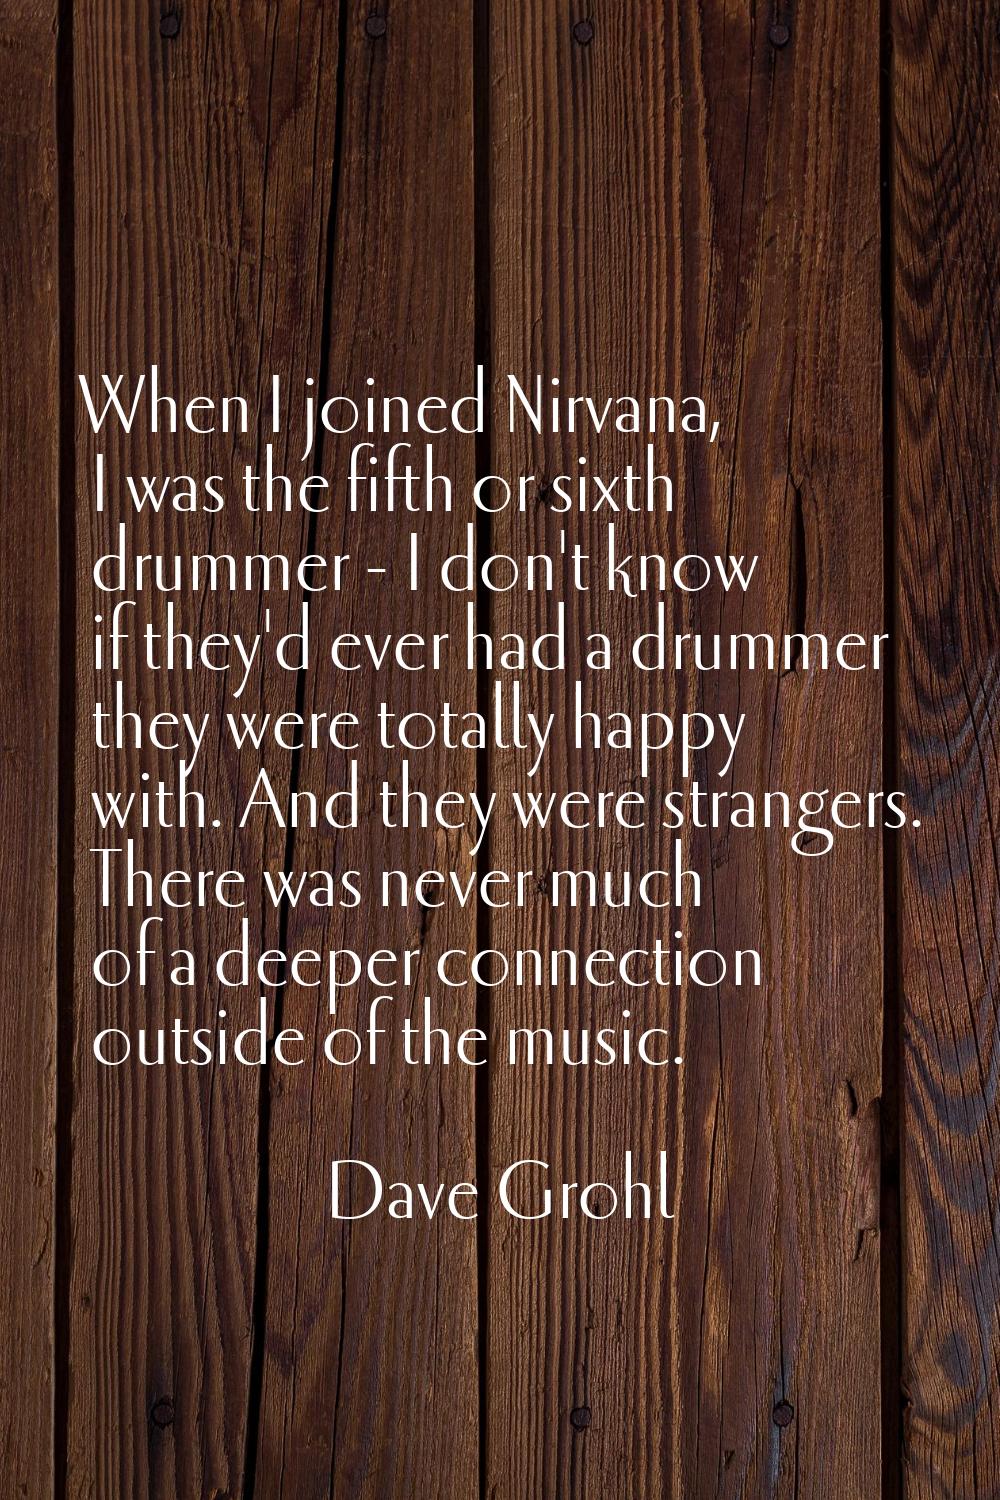 When I joined Nirvana, I was the fifth or sixth drummer - I don't know if they'd ever had a drummer